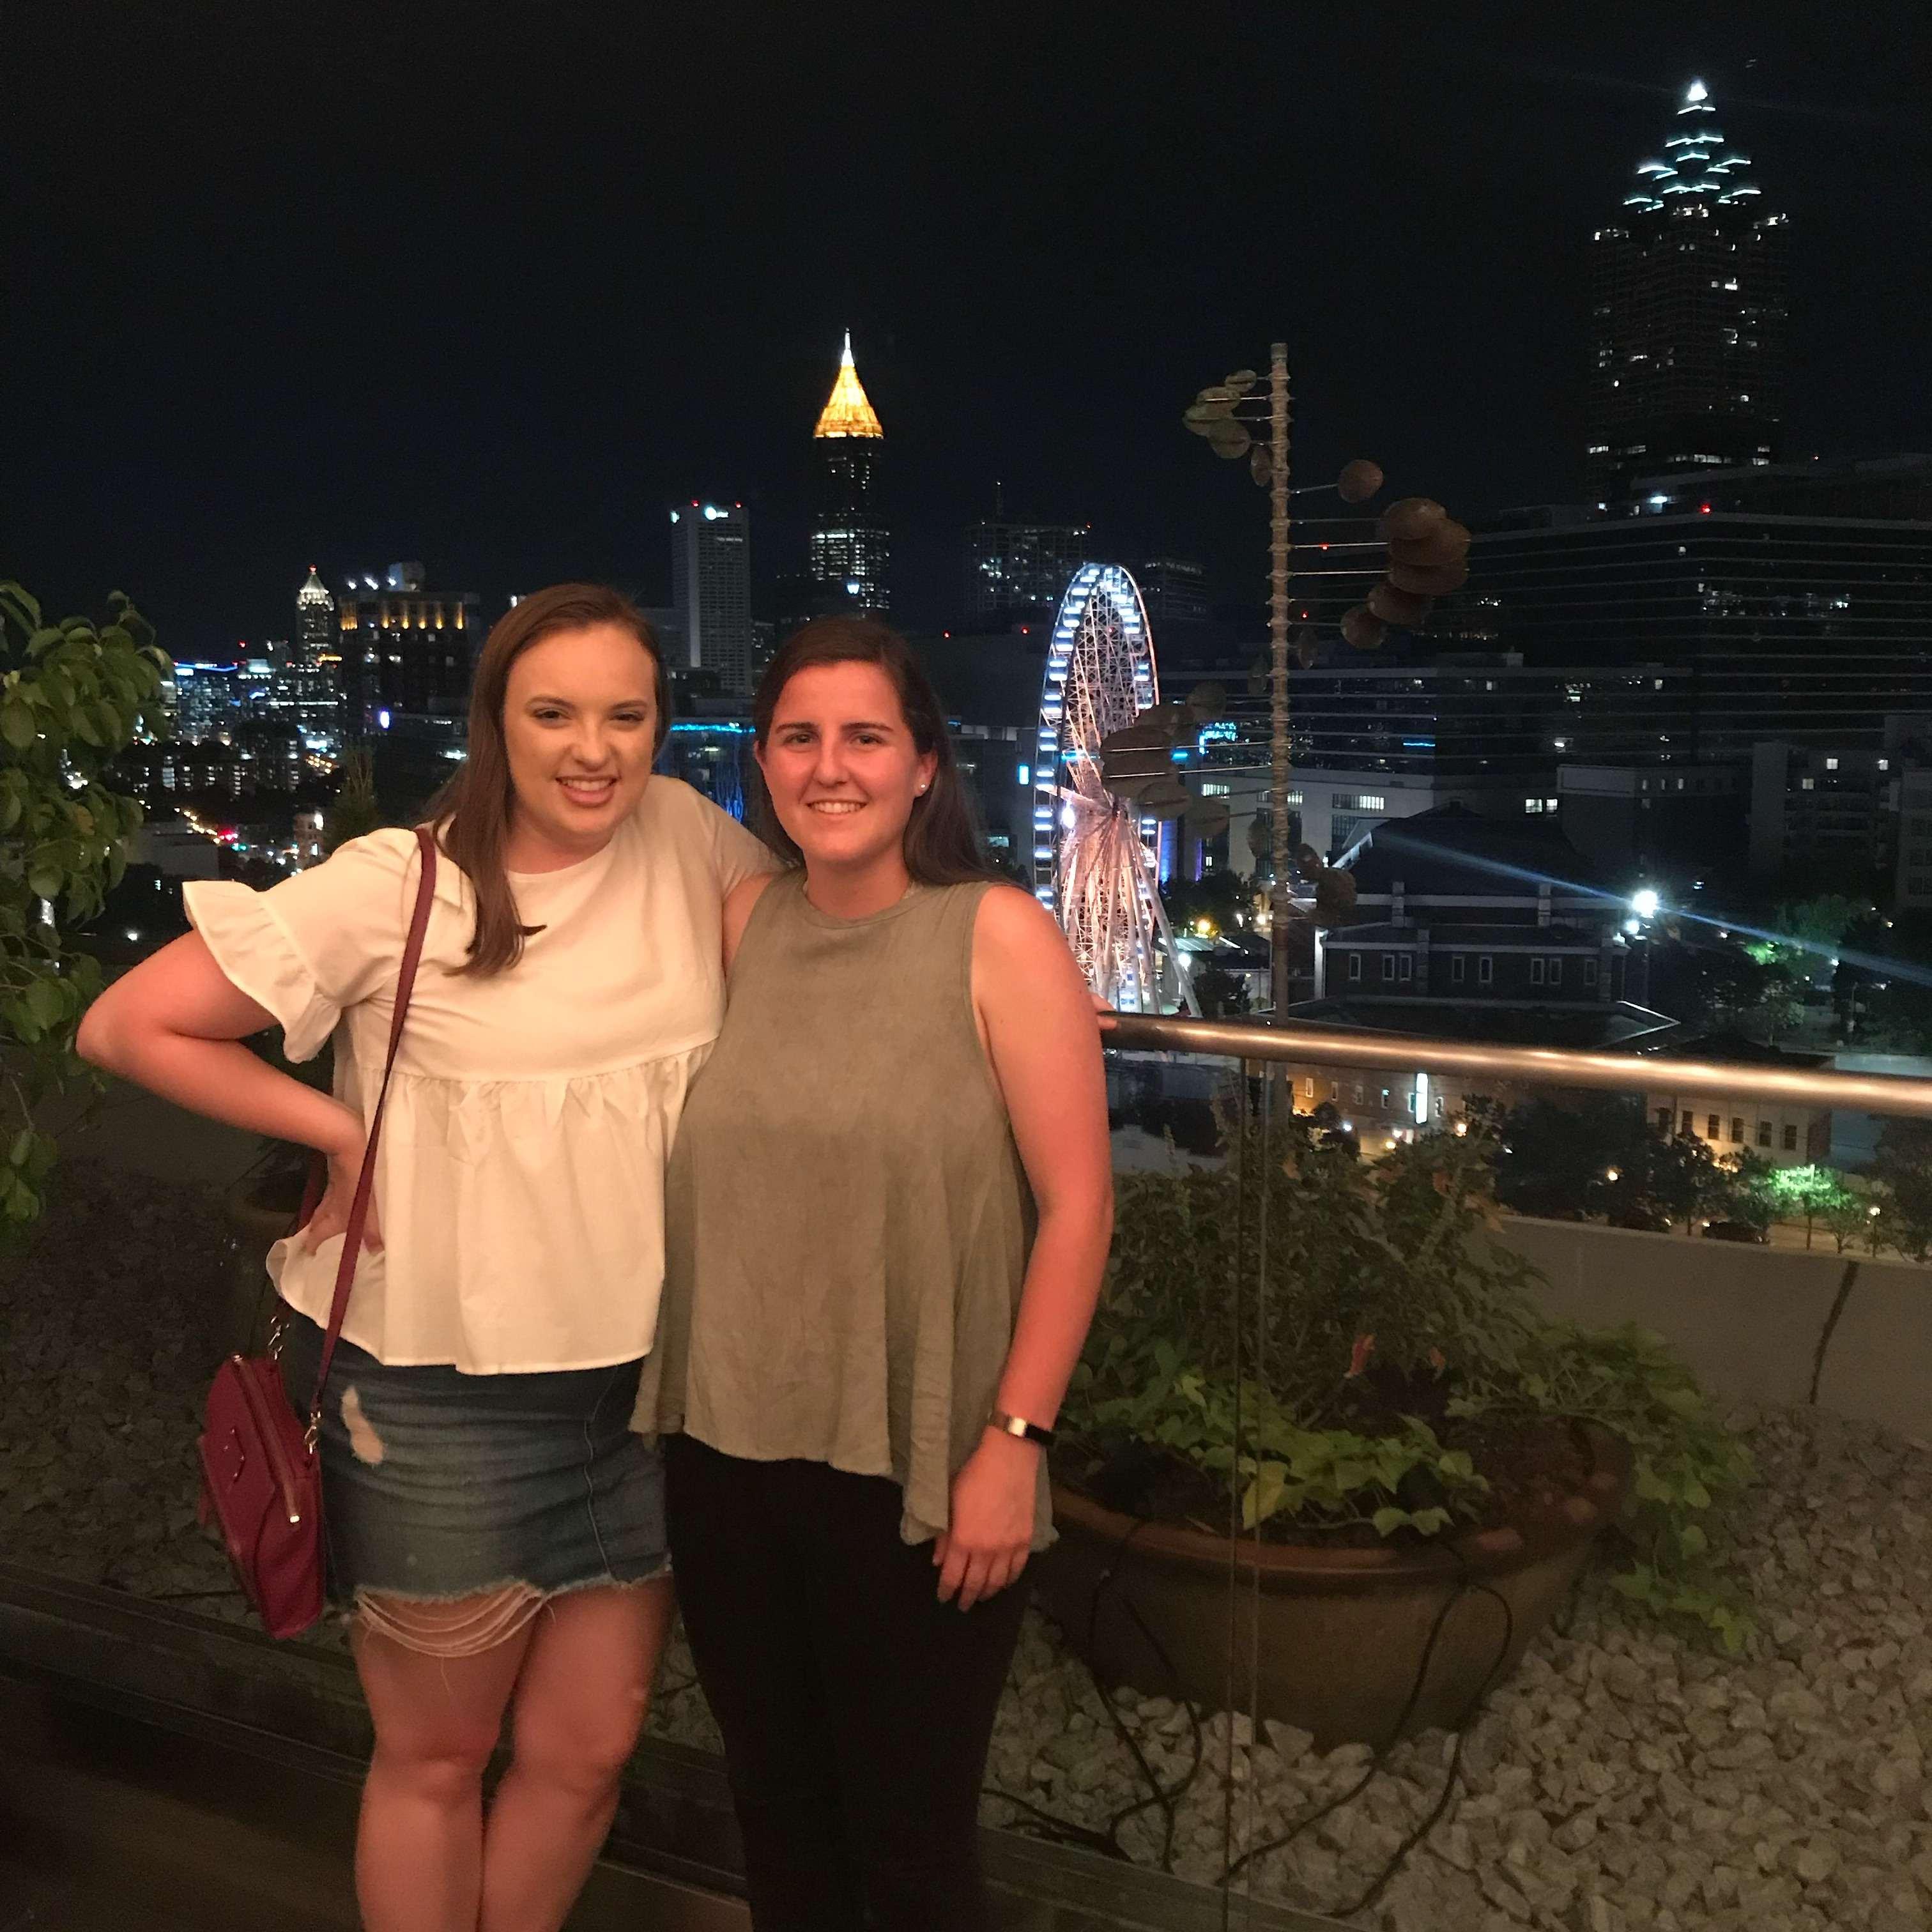 Our one year anniversary date in Atlanta in 2018